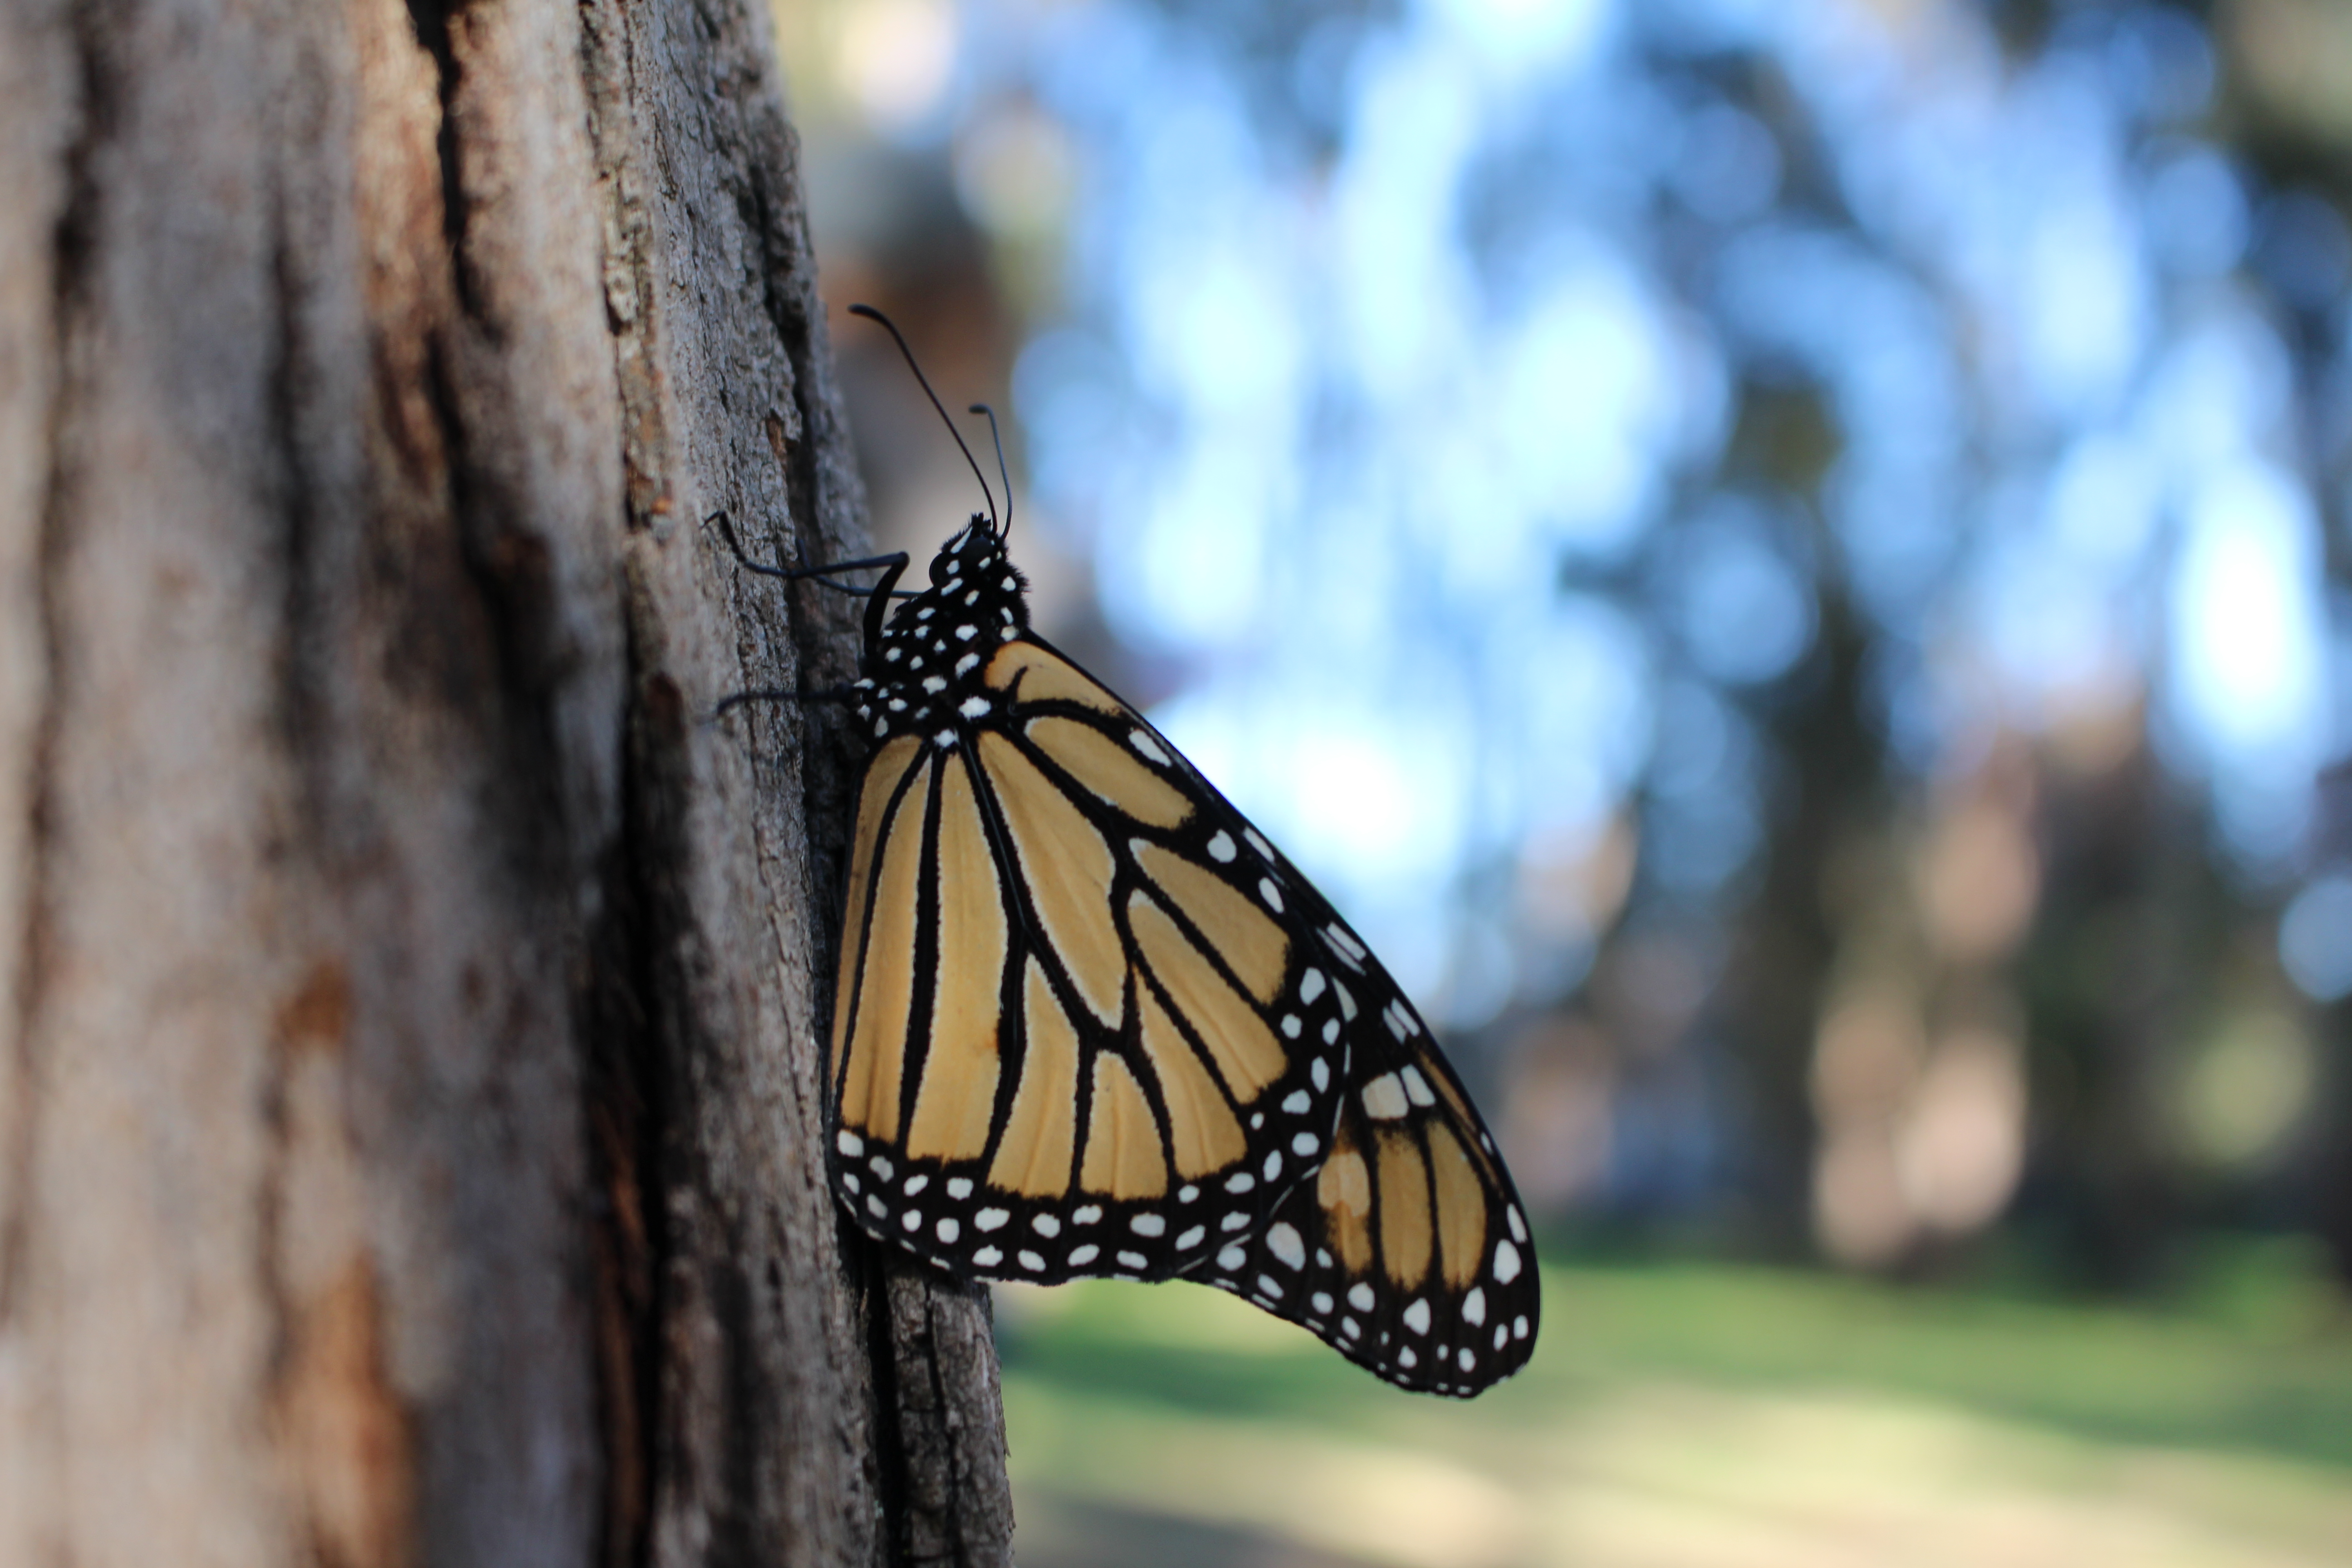 A monarch with closed wings clings to the trunk of a tree in this dimly-lit scene.